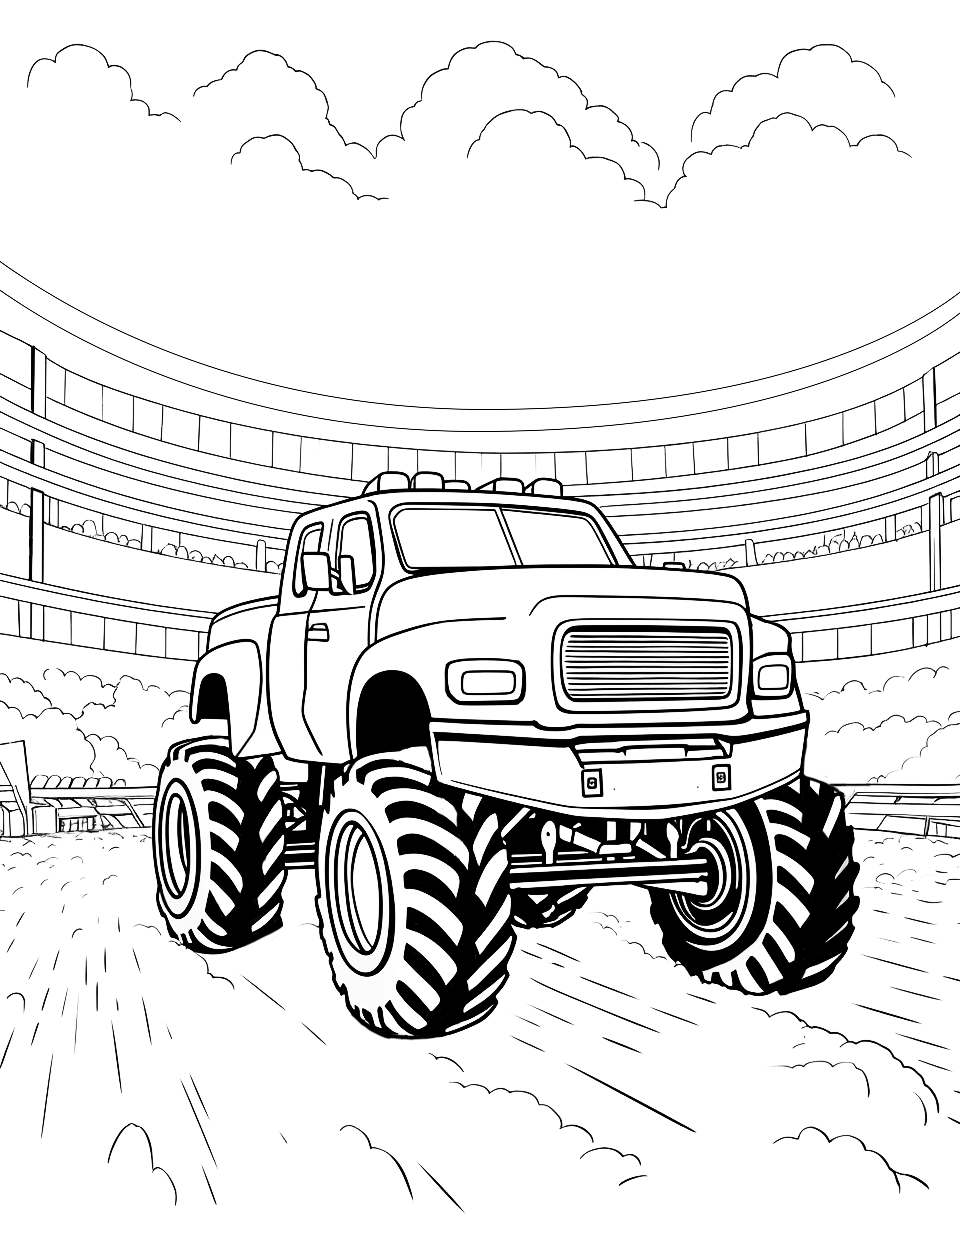 Monster Truck Arena Coloring Page - A monster truck in an arena, taking center stage.